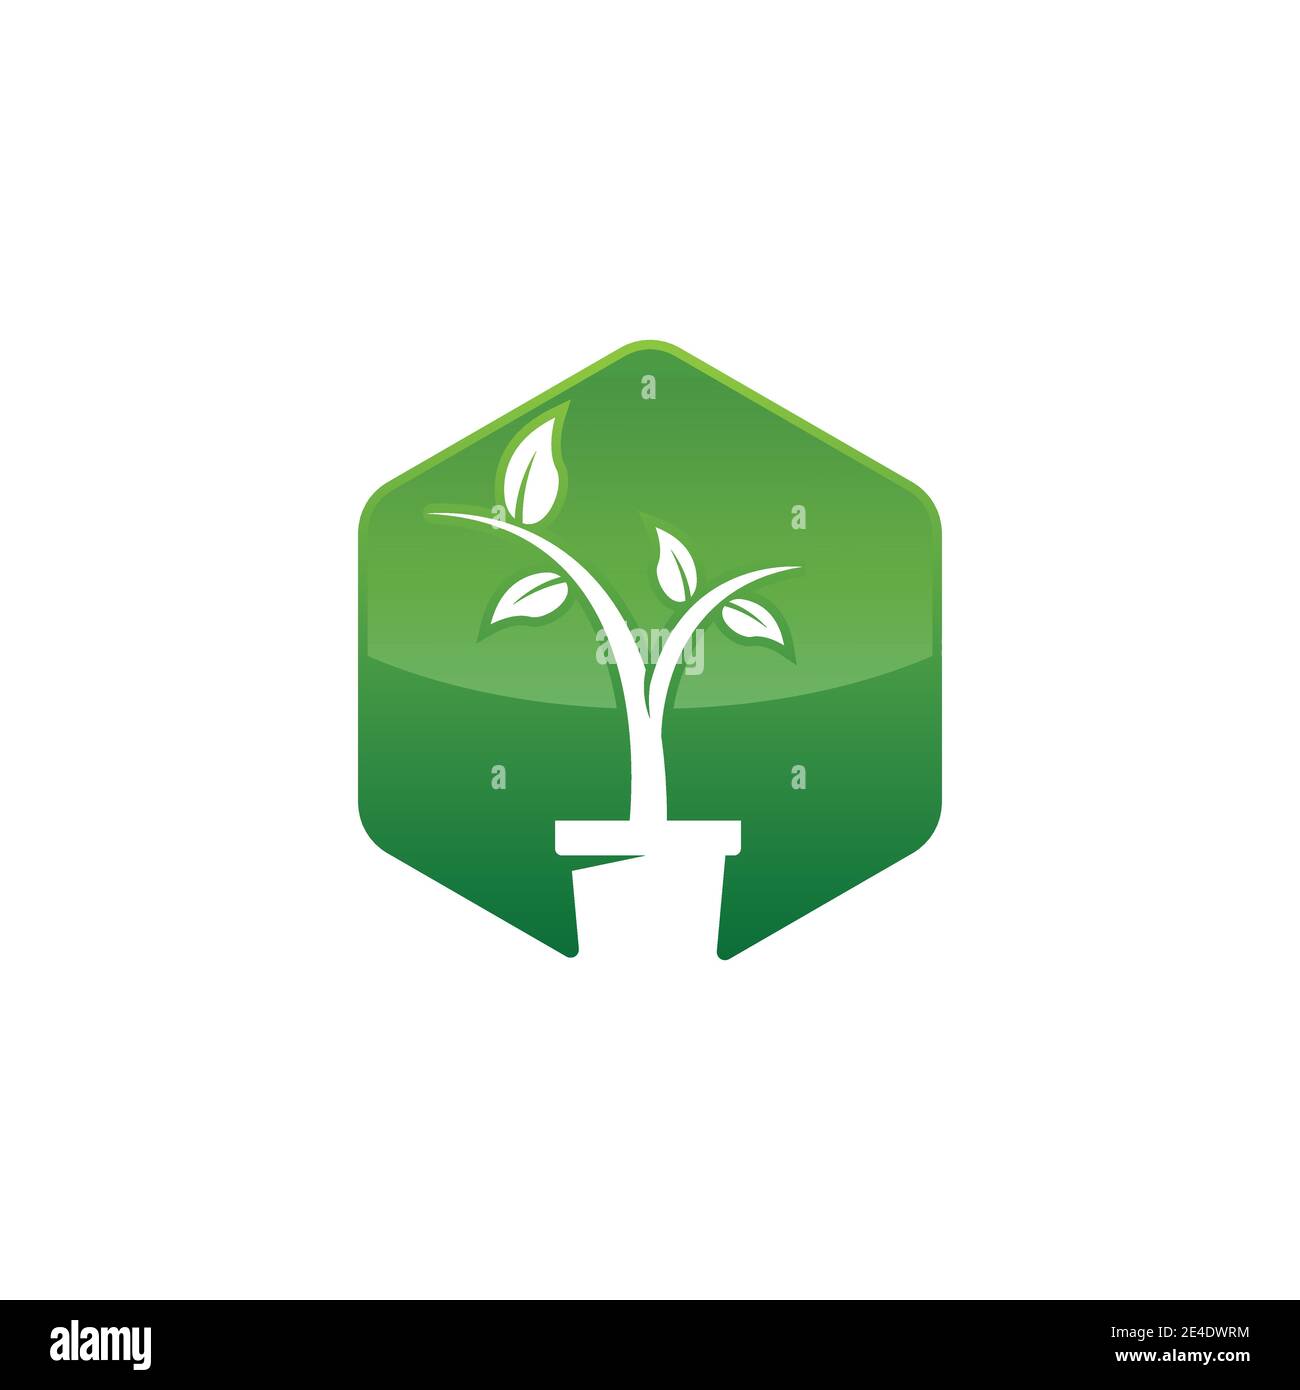 Landscape logo vector design image. Lanscaping logo with plant growth inside a square shape Stock Vector